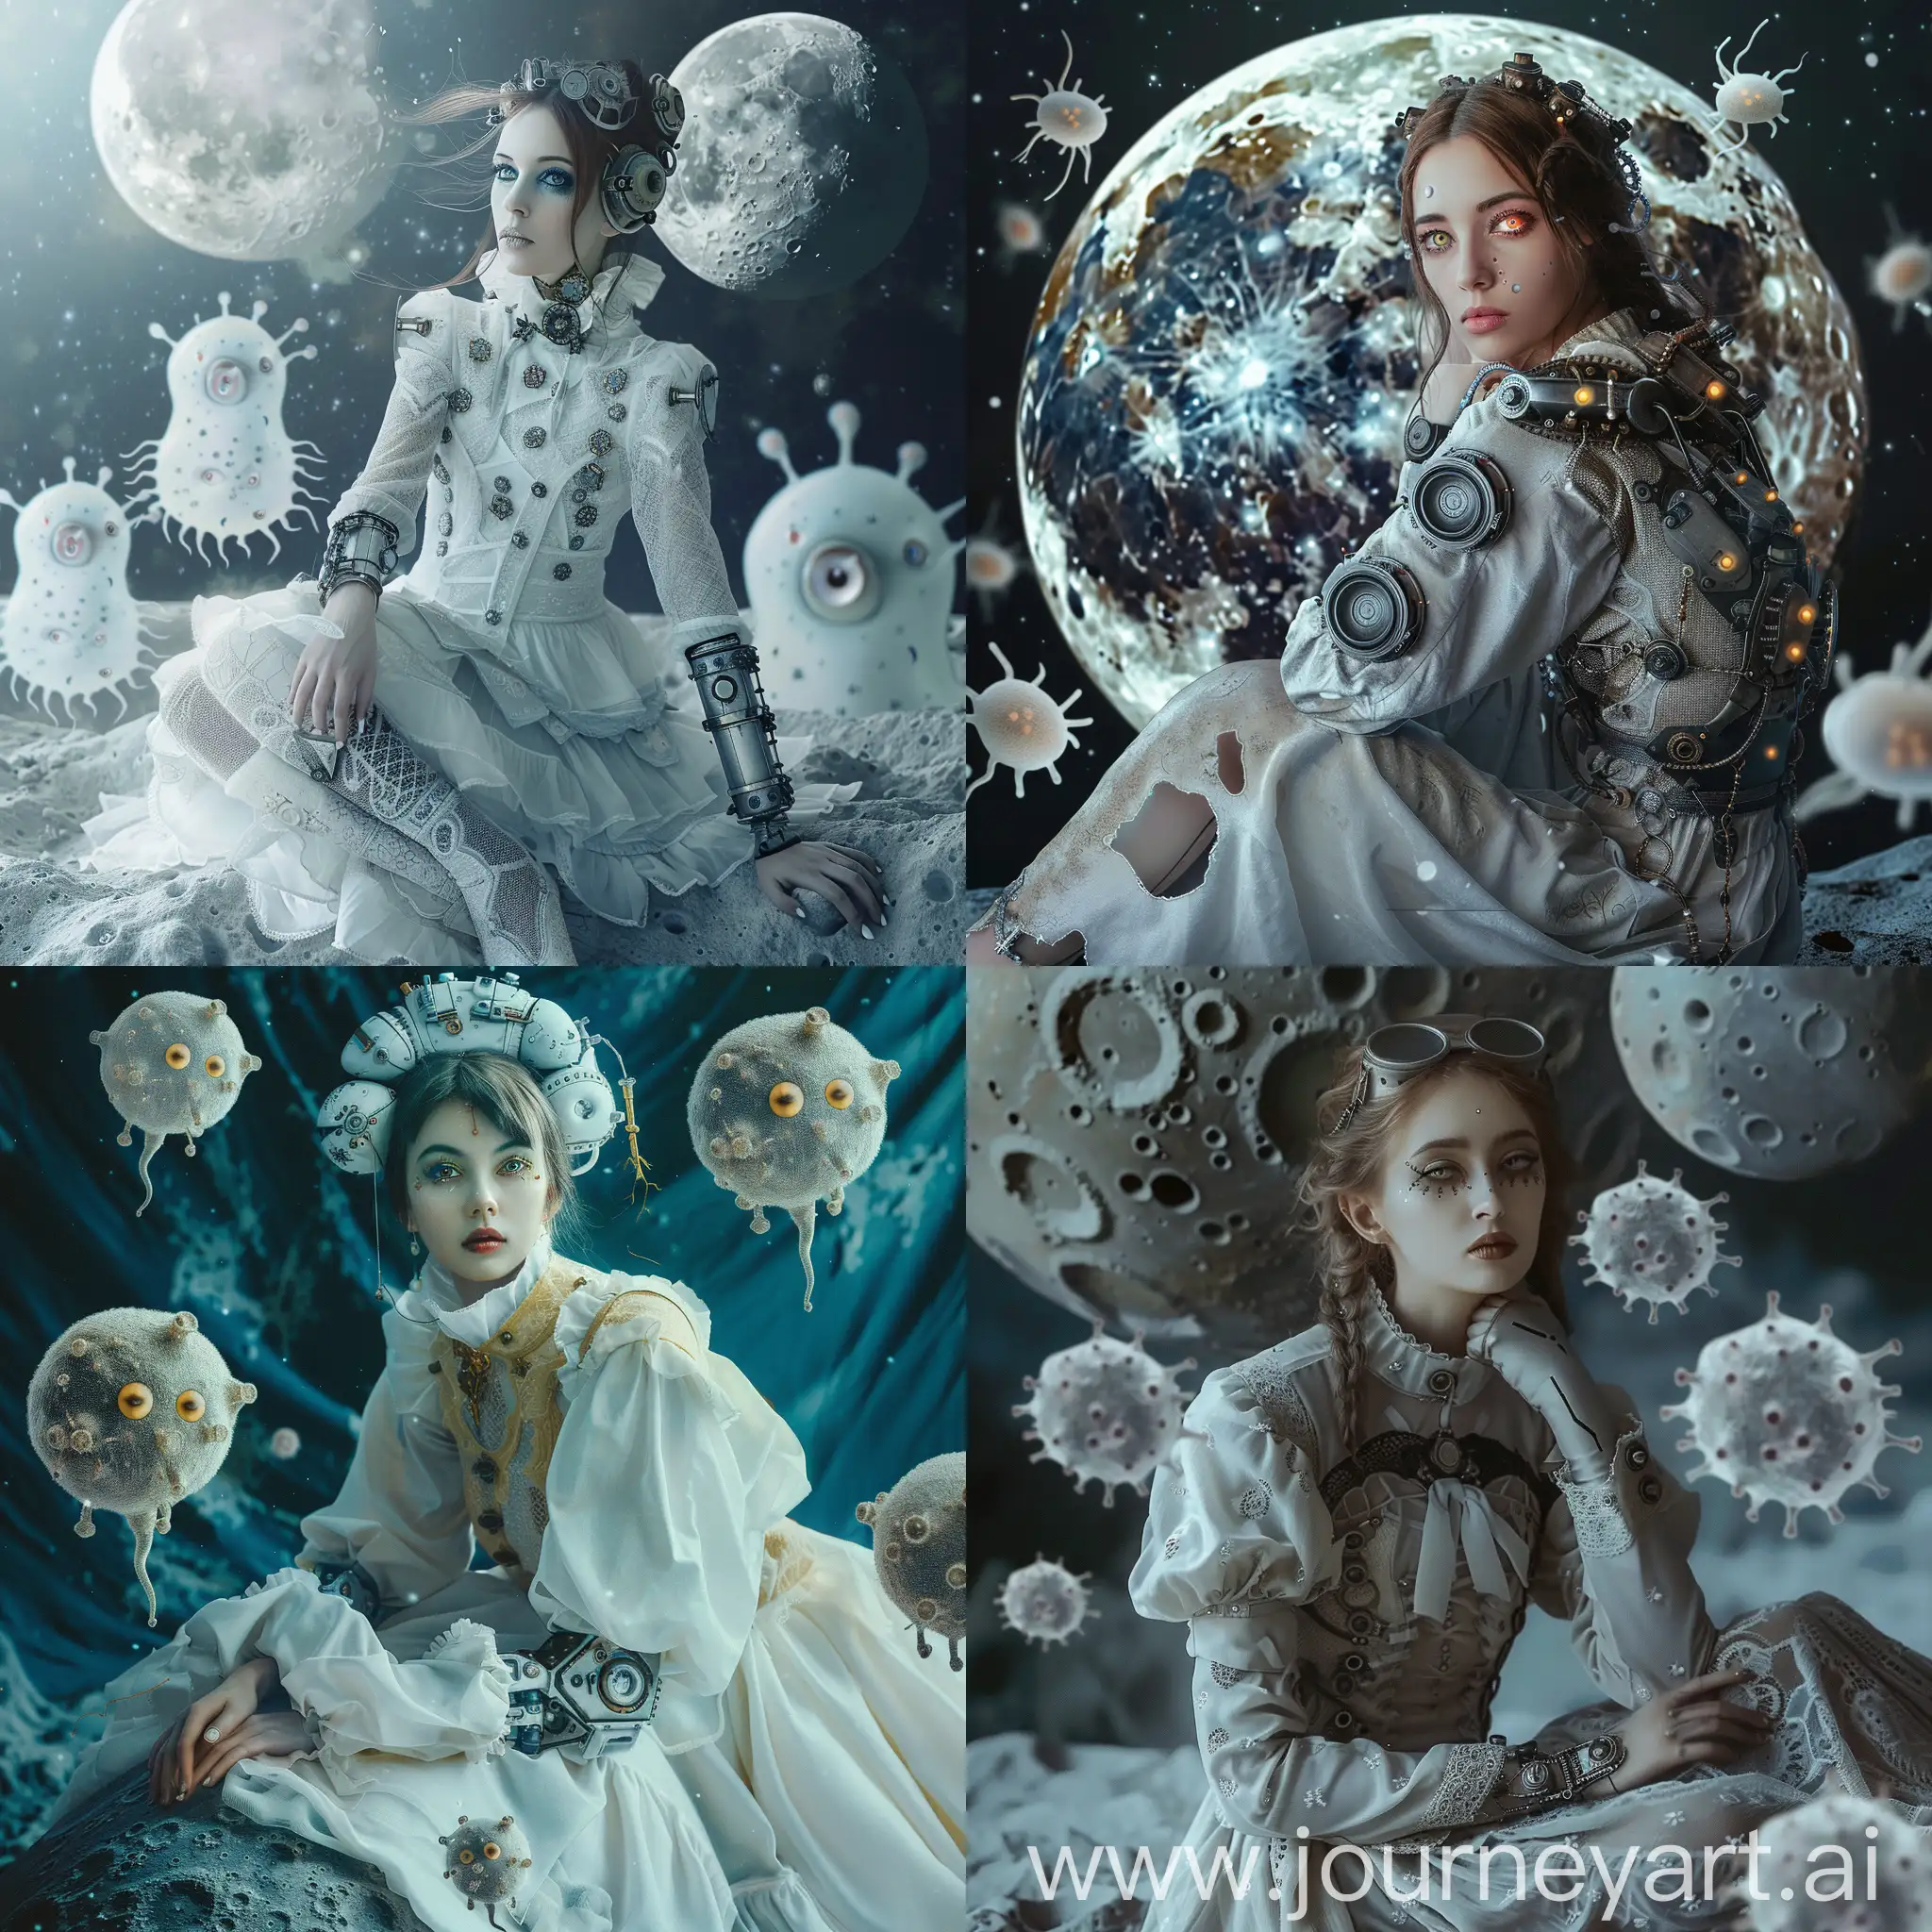 A beautiful medieval steampunk cyborg woman with beautiful eyes sitting on the moon surrounded by cute bacteria ghosts. Photographic